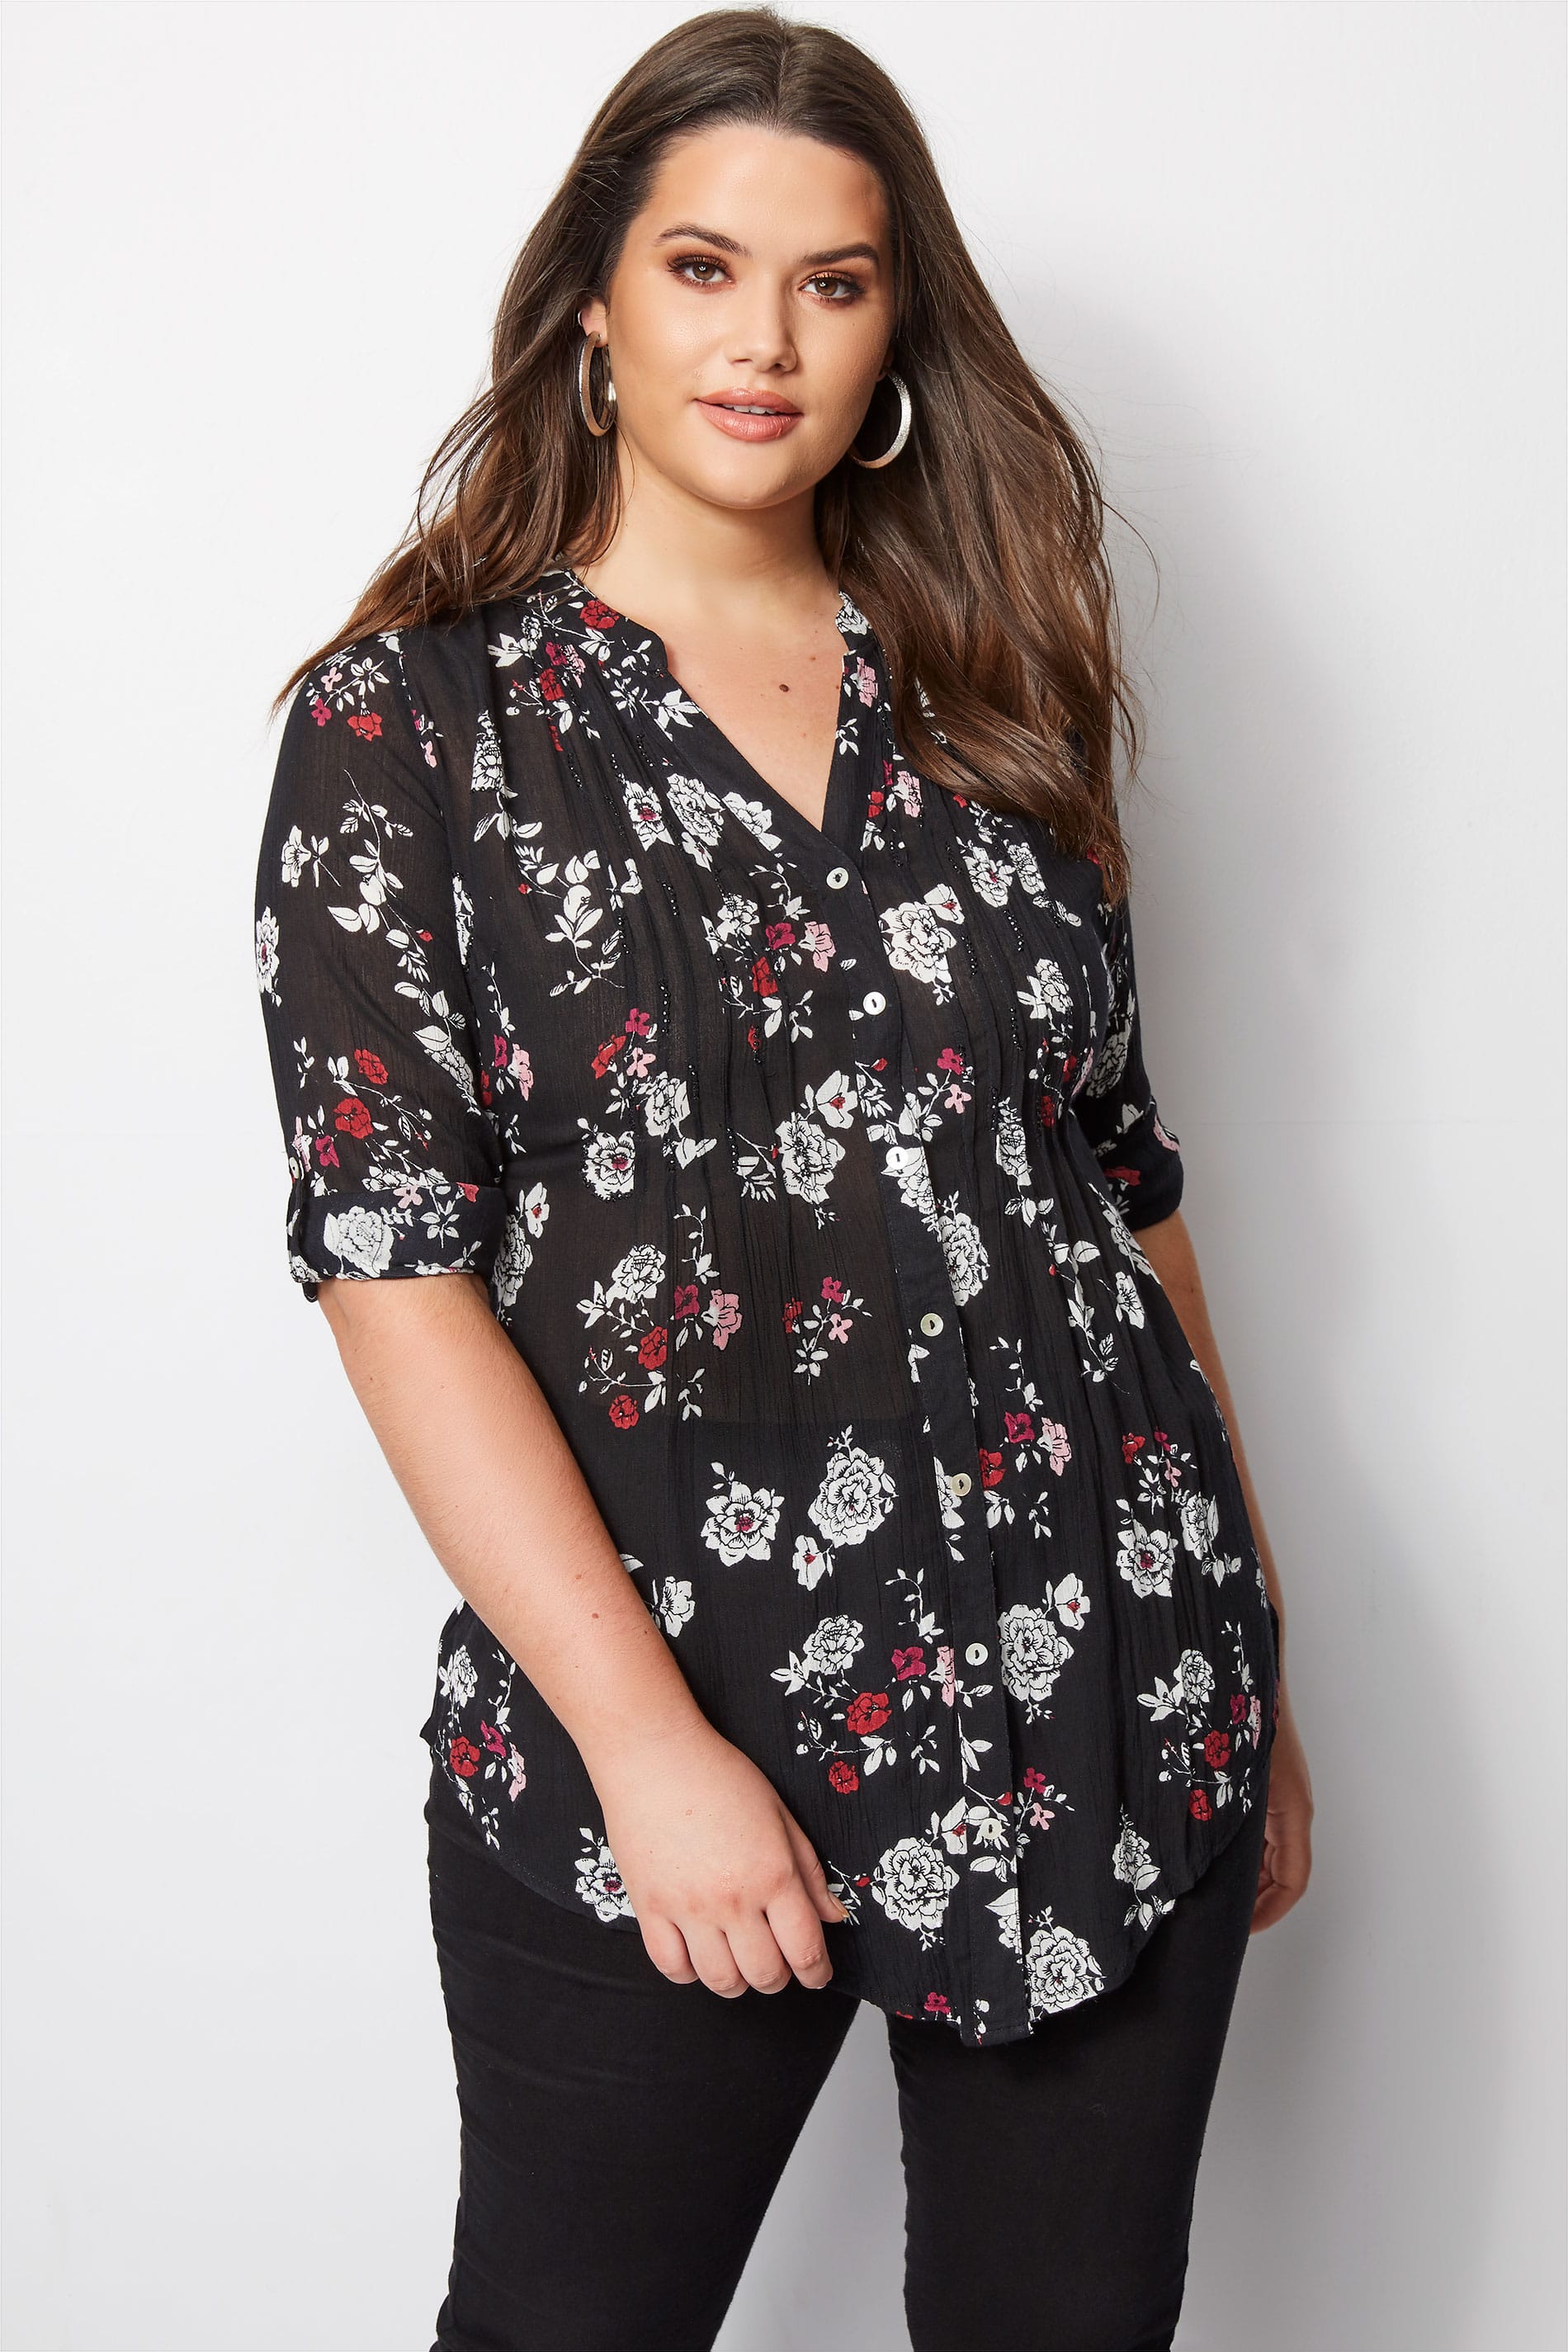 Black & White Floral Pintuck Longline Blouse With Beading Detailing